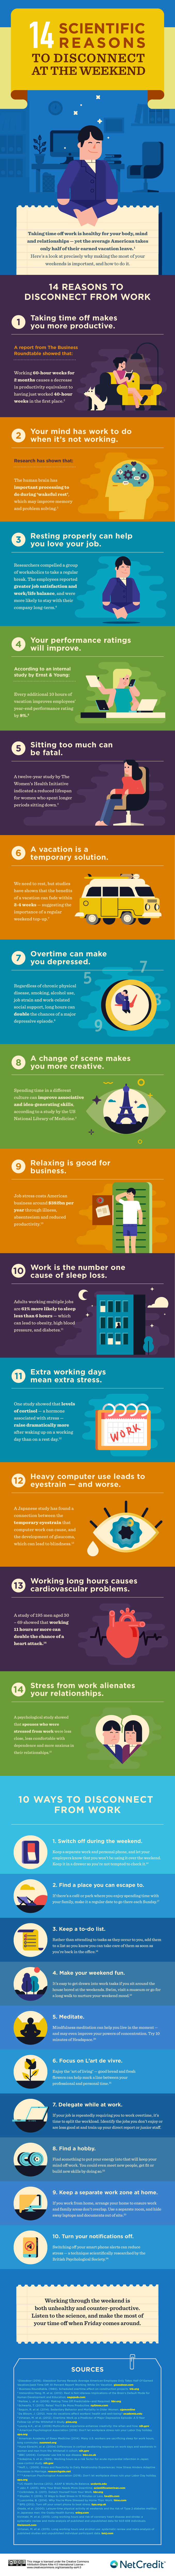 14 Scientific Reasons To Disconnect At The Weekend - #Infographic